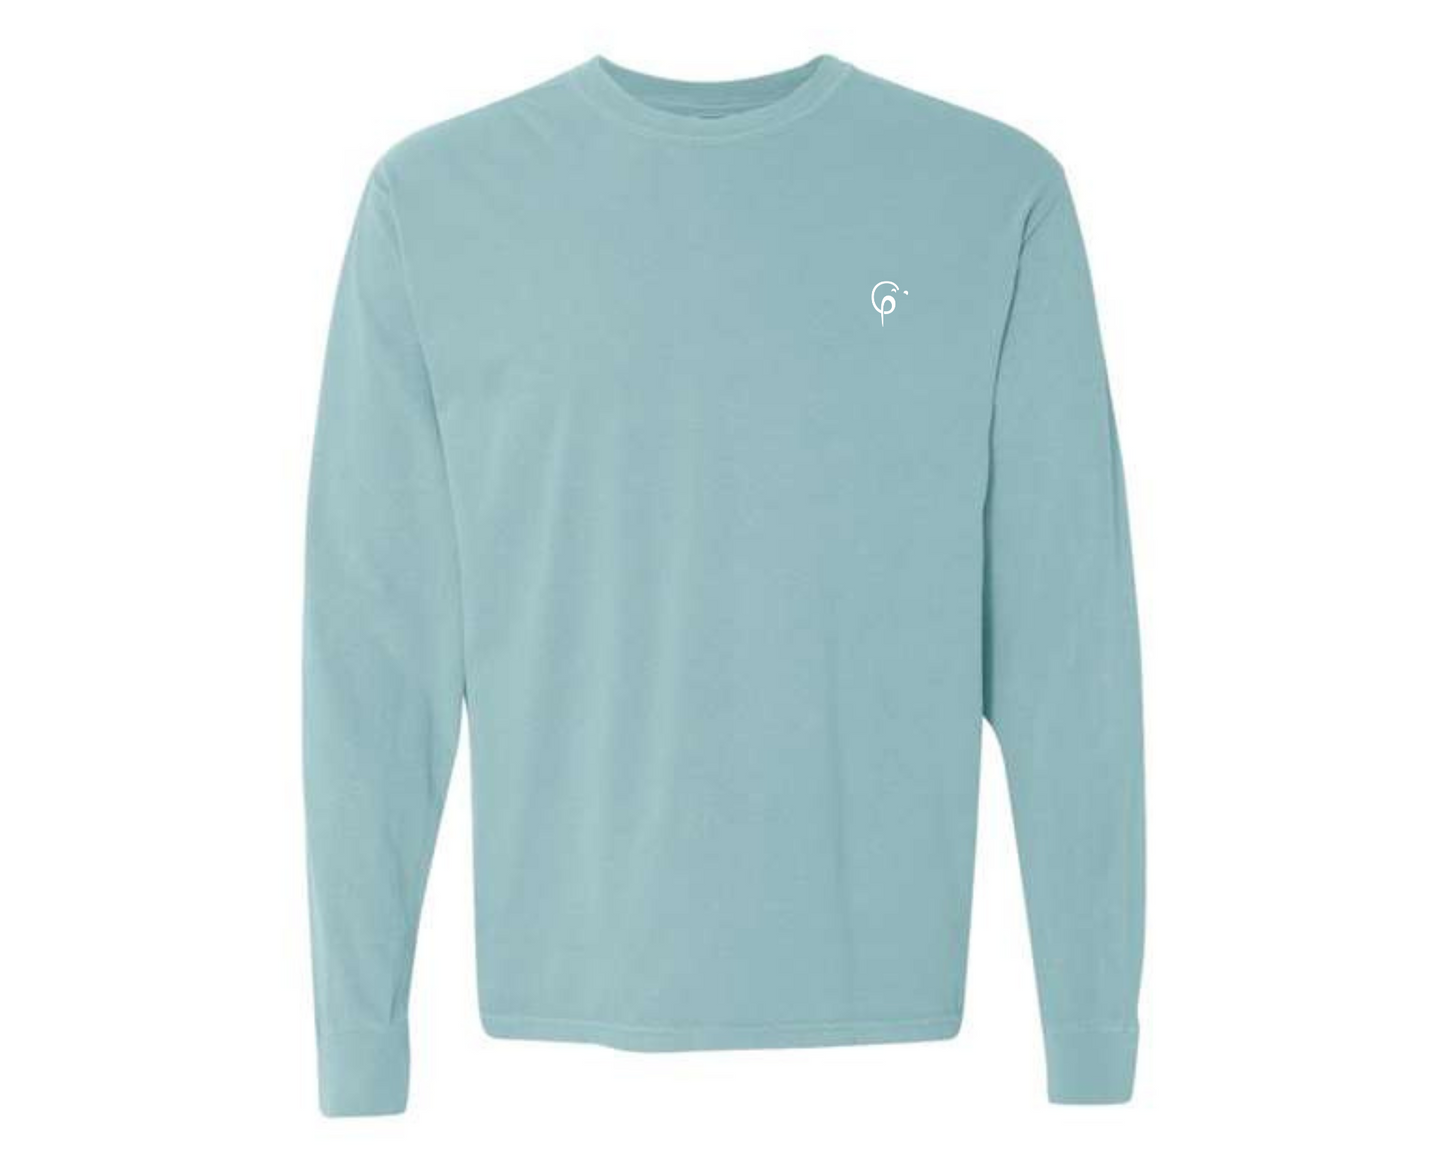 Paws and enjoy the little things Long Sleeve T-Shirt, Chalky Mint